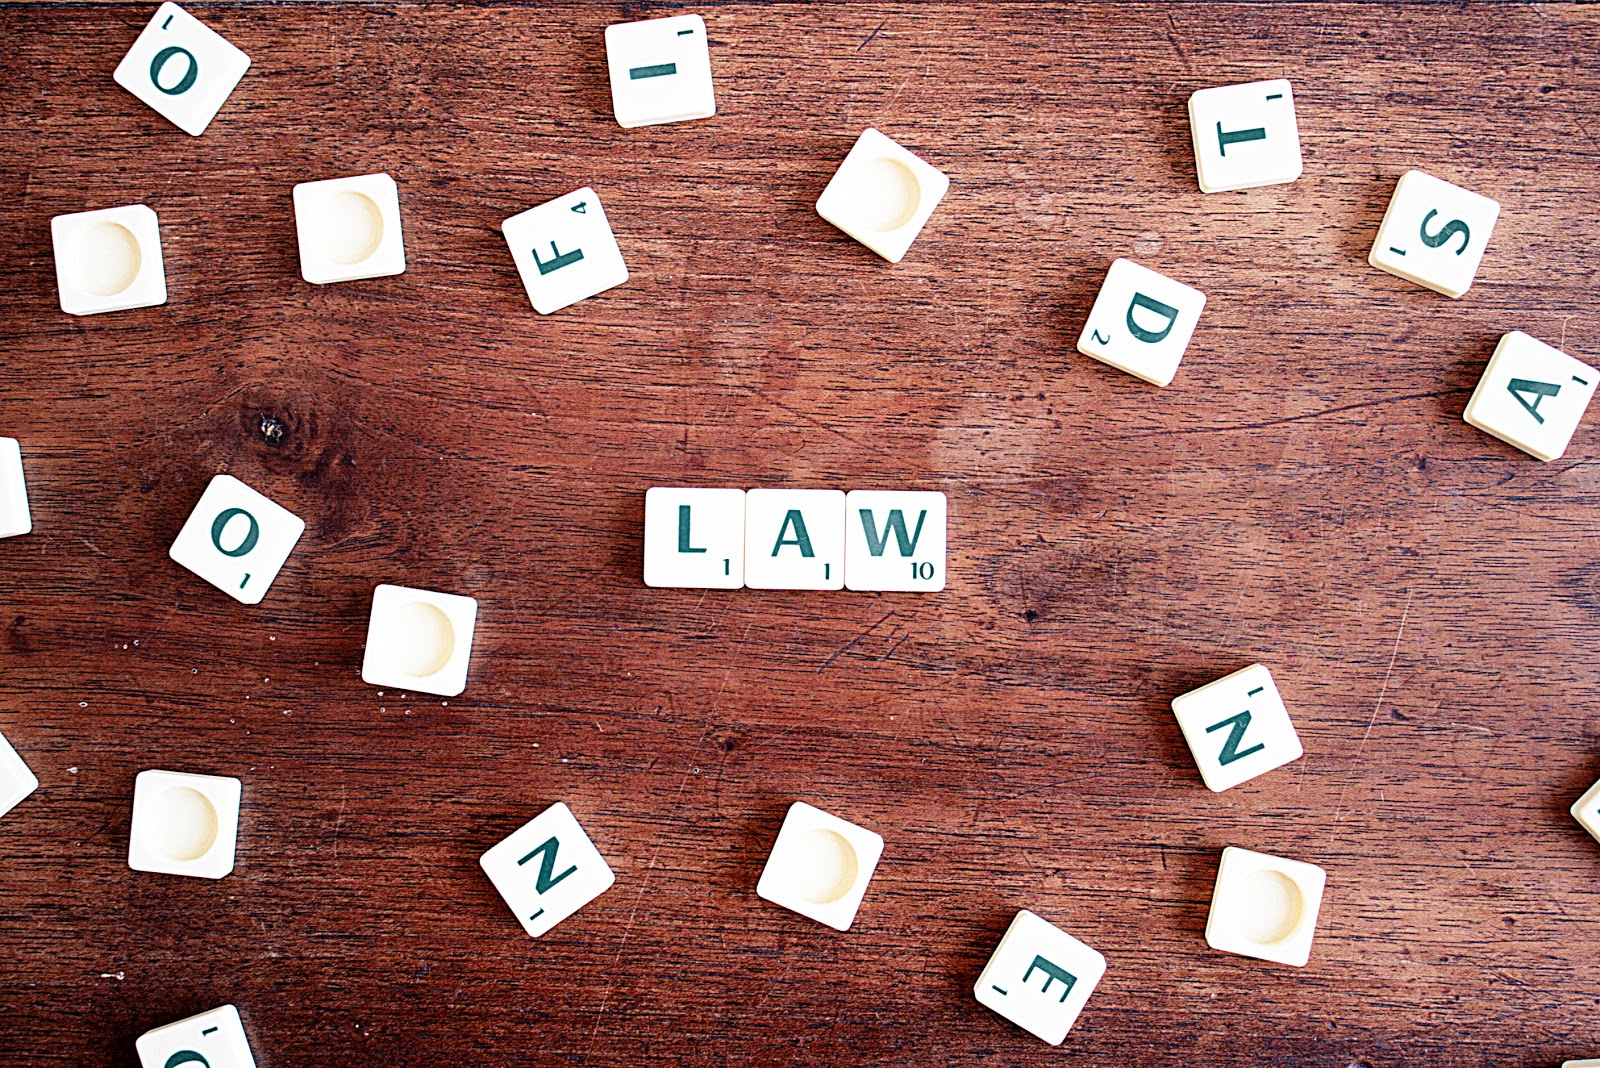 Close up of scrabble tiles spelling out the word ‘law’